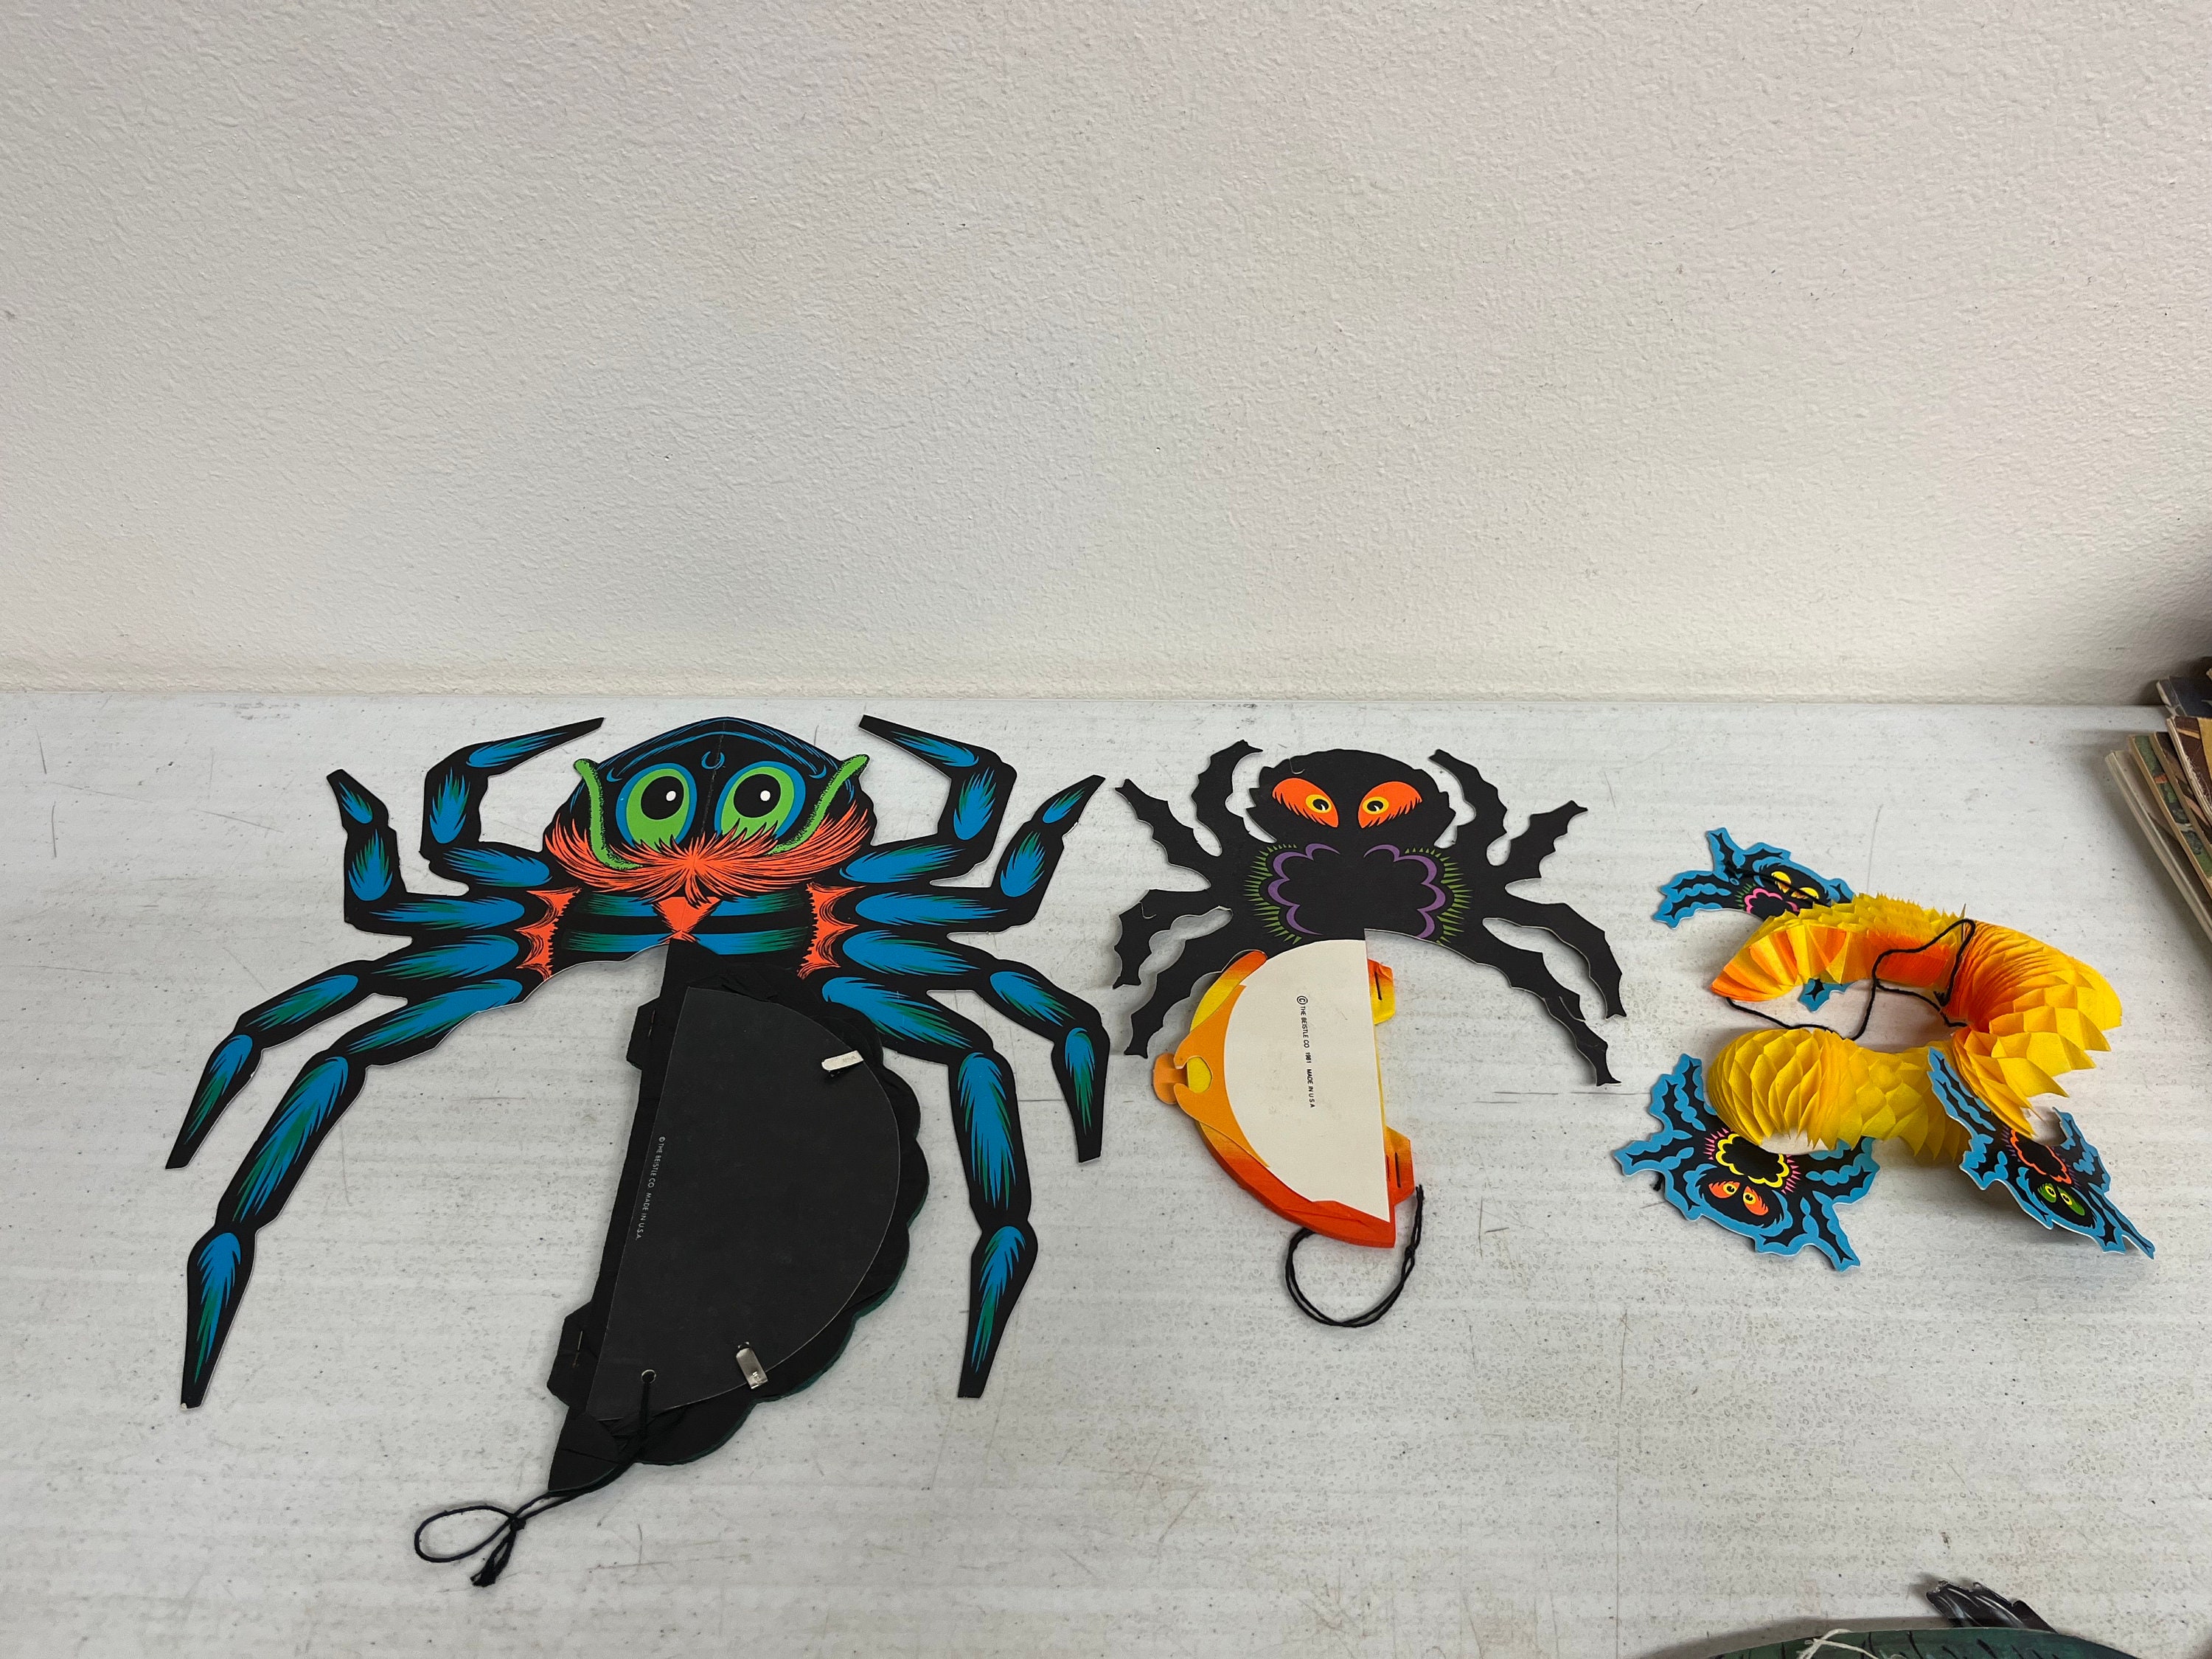 Jumping Spider Enclosure Accessories and Hides, Jumping Spider Decor, 3D  Printed Accessories for Jumping Spider Enclosure, Magnetic Decor 